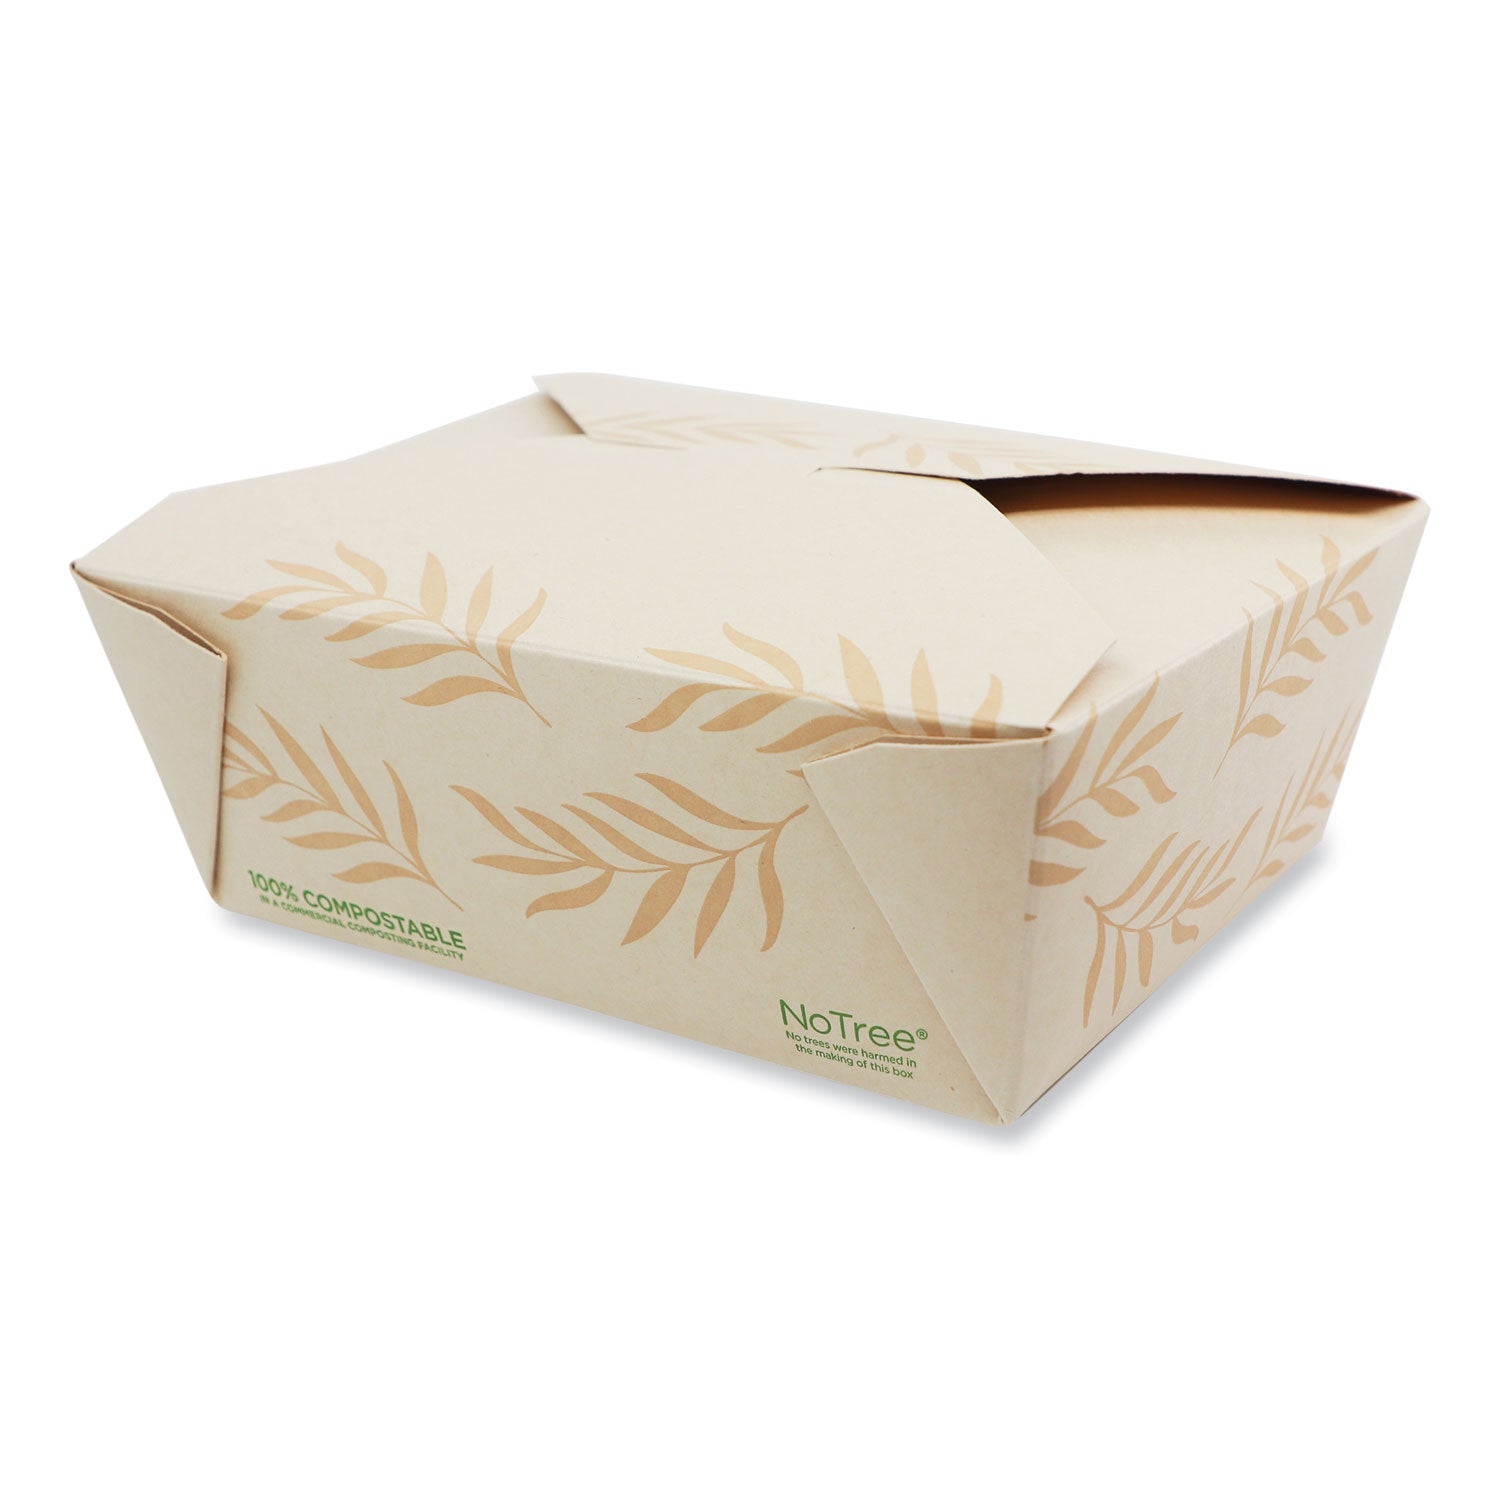 no-tree-folded-takeout-containers-46-oz-55-x-69-x-25-natural-sugarcane-300-carton_wortont8 - 1